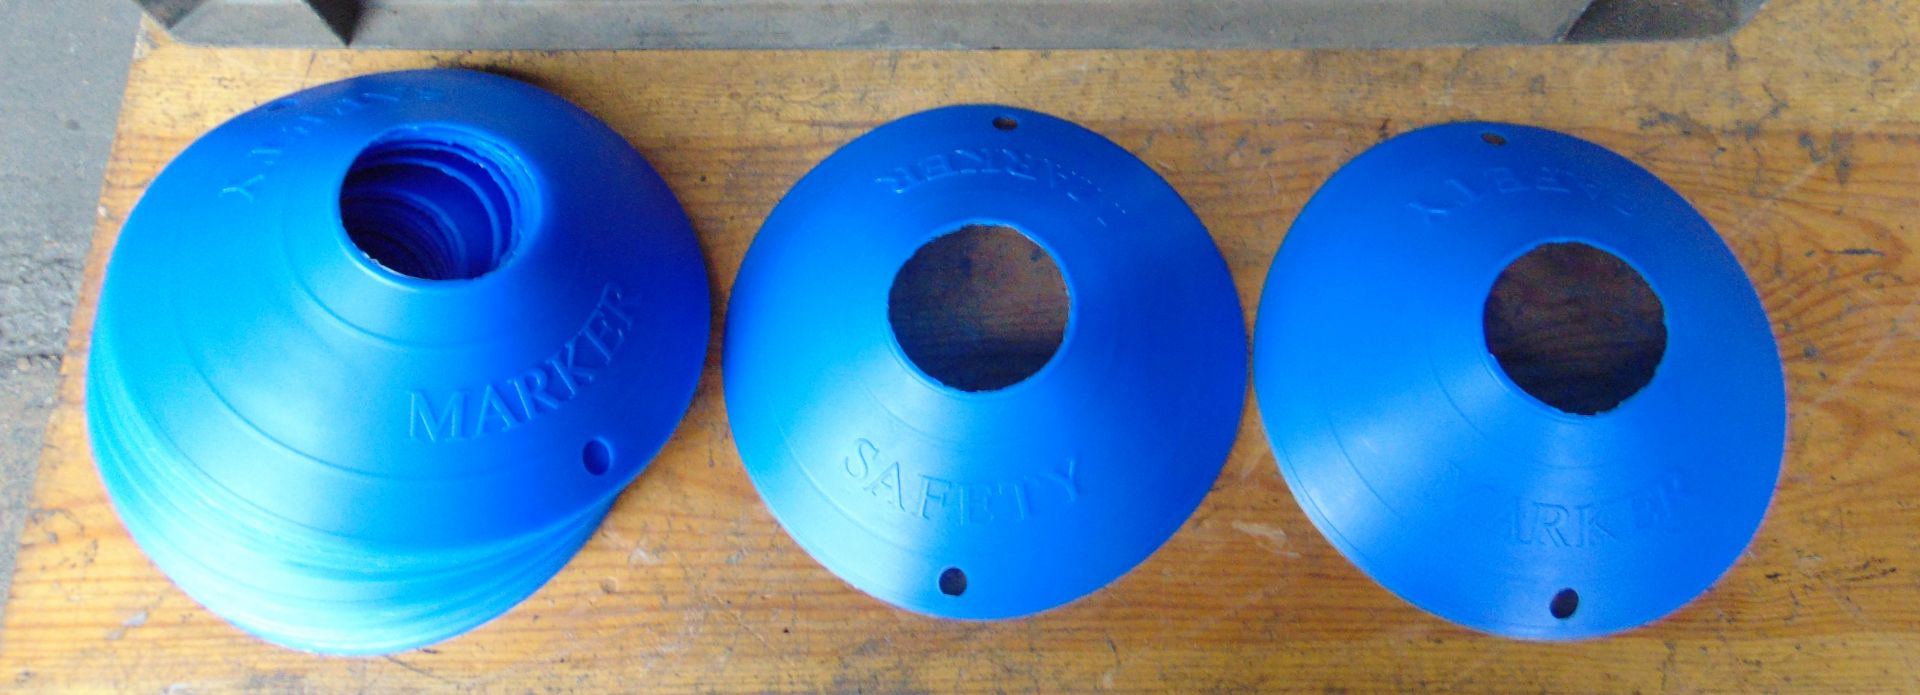 New Unissued Approx. 200 Blue Plastic Safety Markers - Image 2 of 4